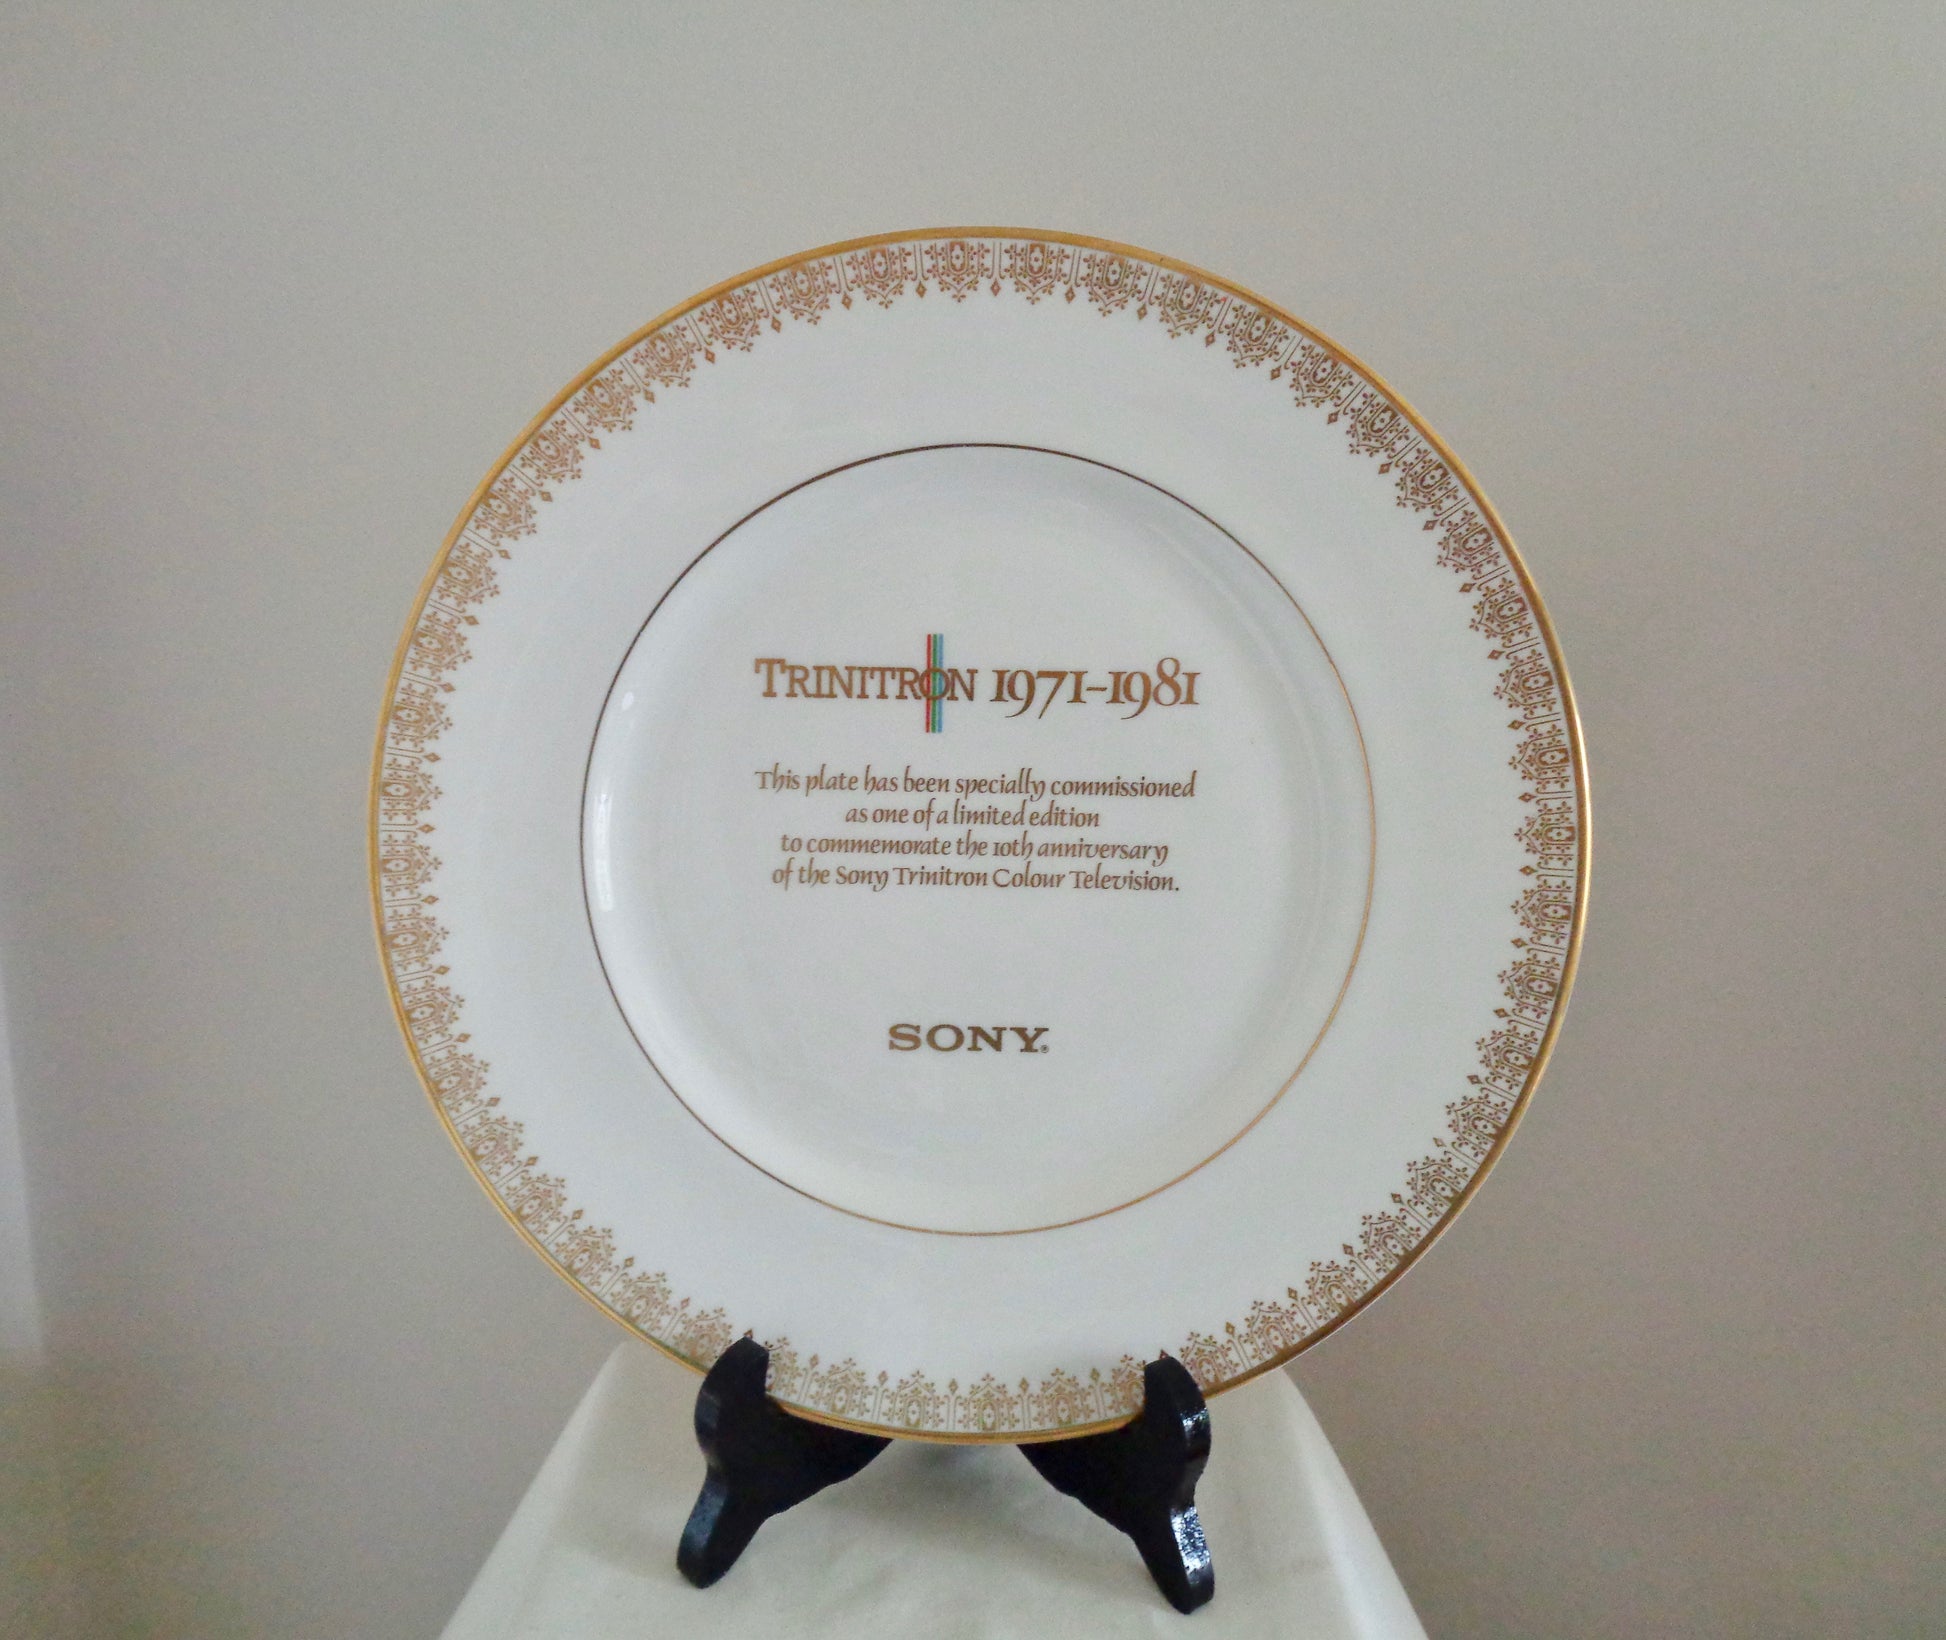 Sony Trinitron Television 10th Anniversary Collector's Plate By Royal Doulton